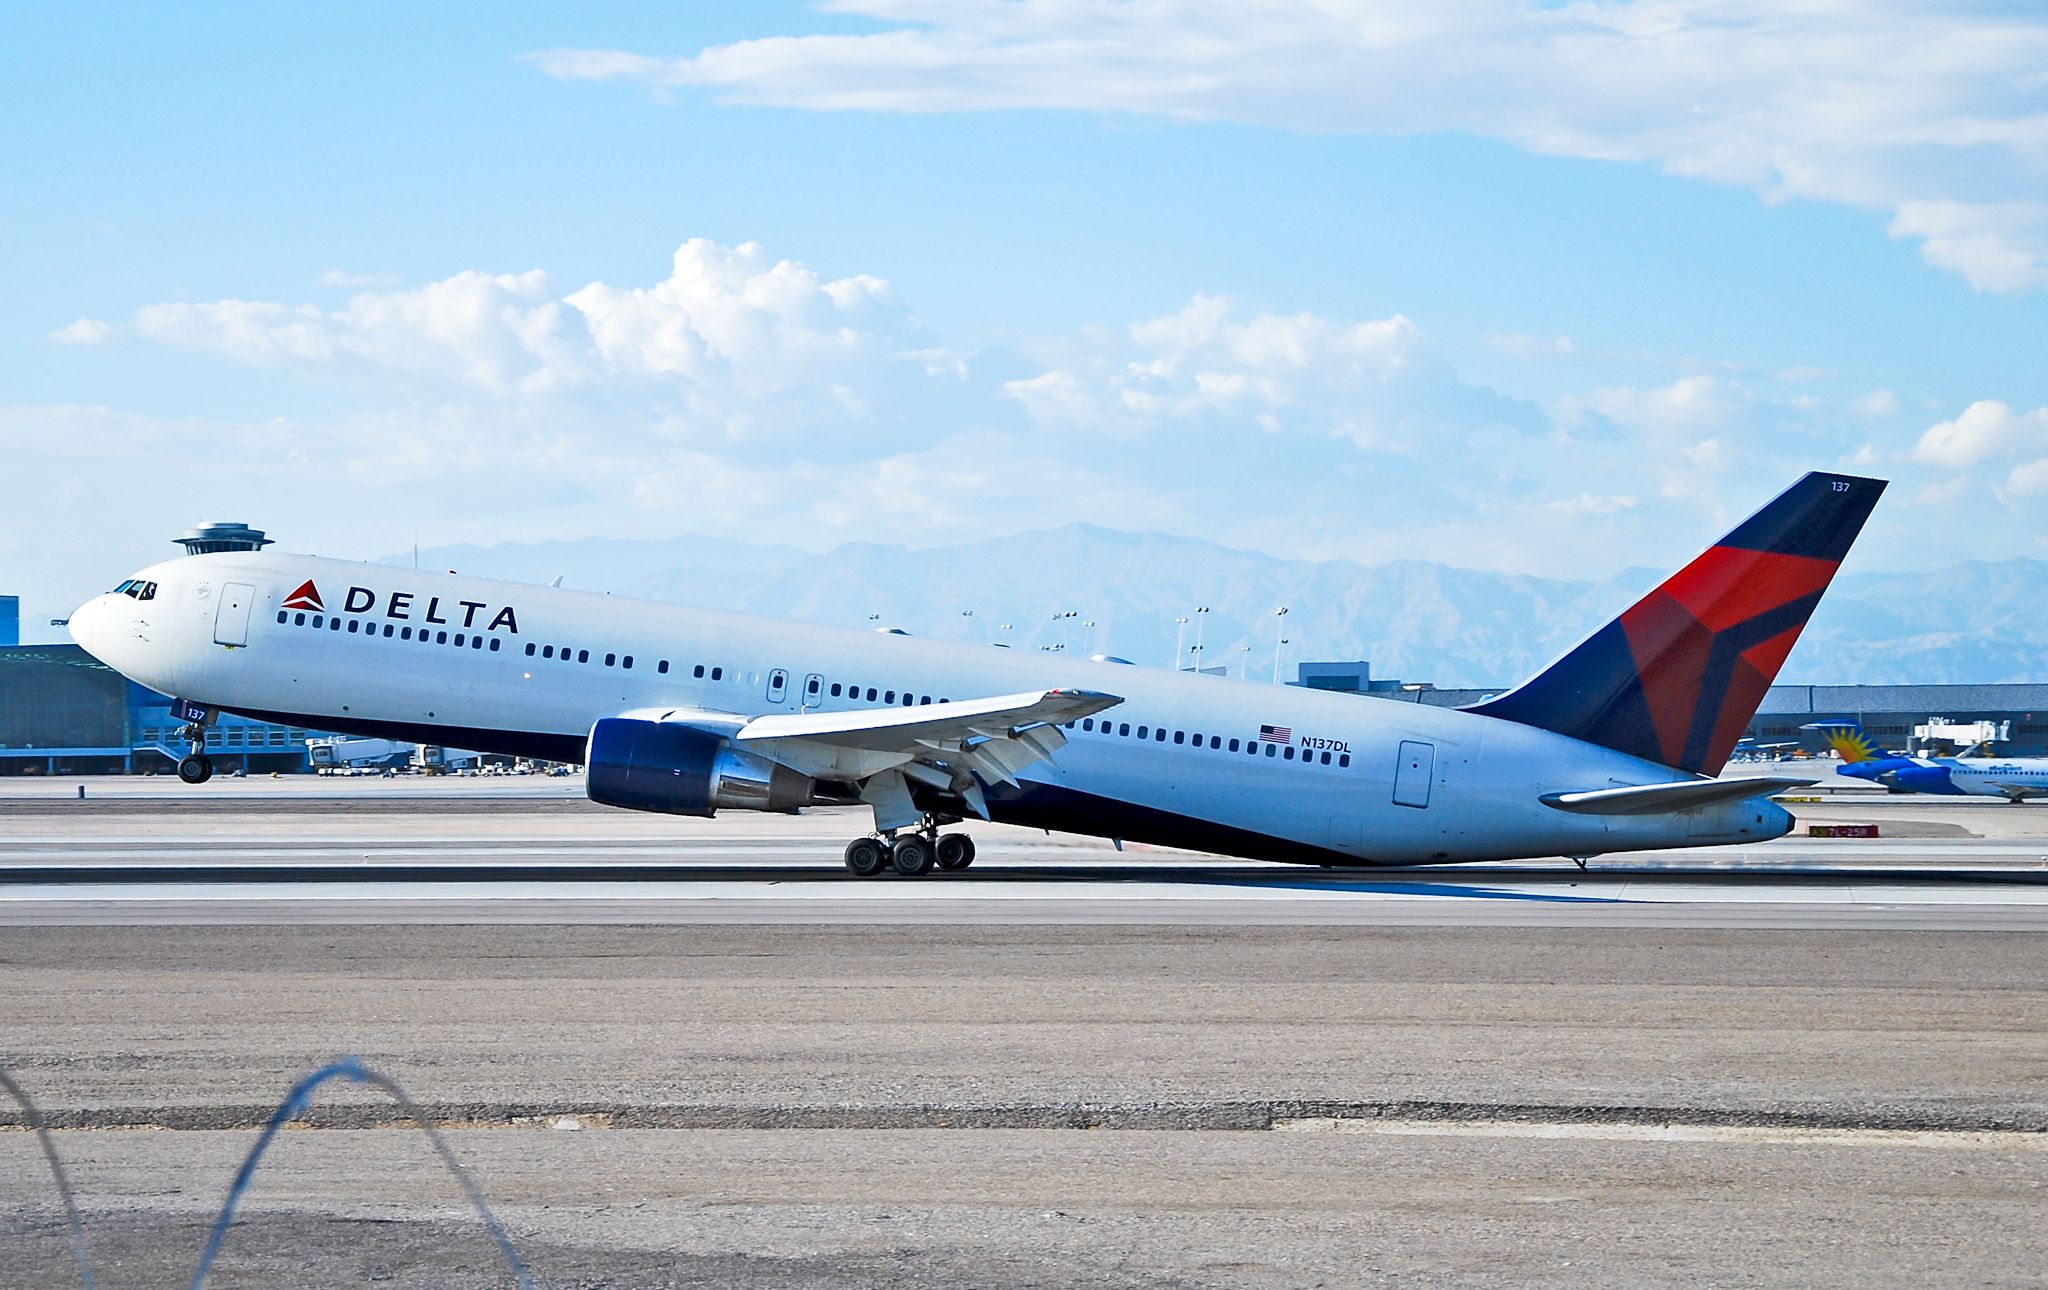 (Tailstrike)_N137DL_Delta_Air_Lines_Boeing_767-332_N137DL_(cn_25306-392)_Airplane_Tailstrike_Protection_System_(7848930426)_(2)